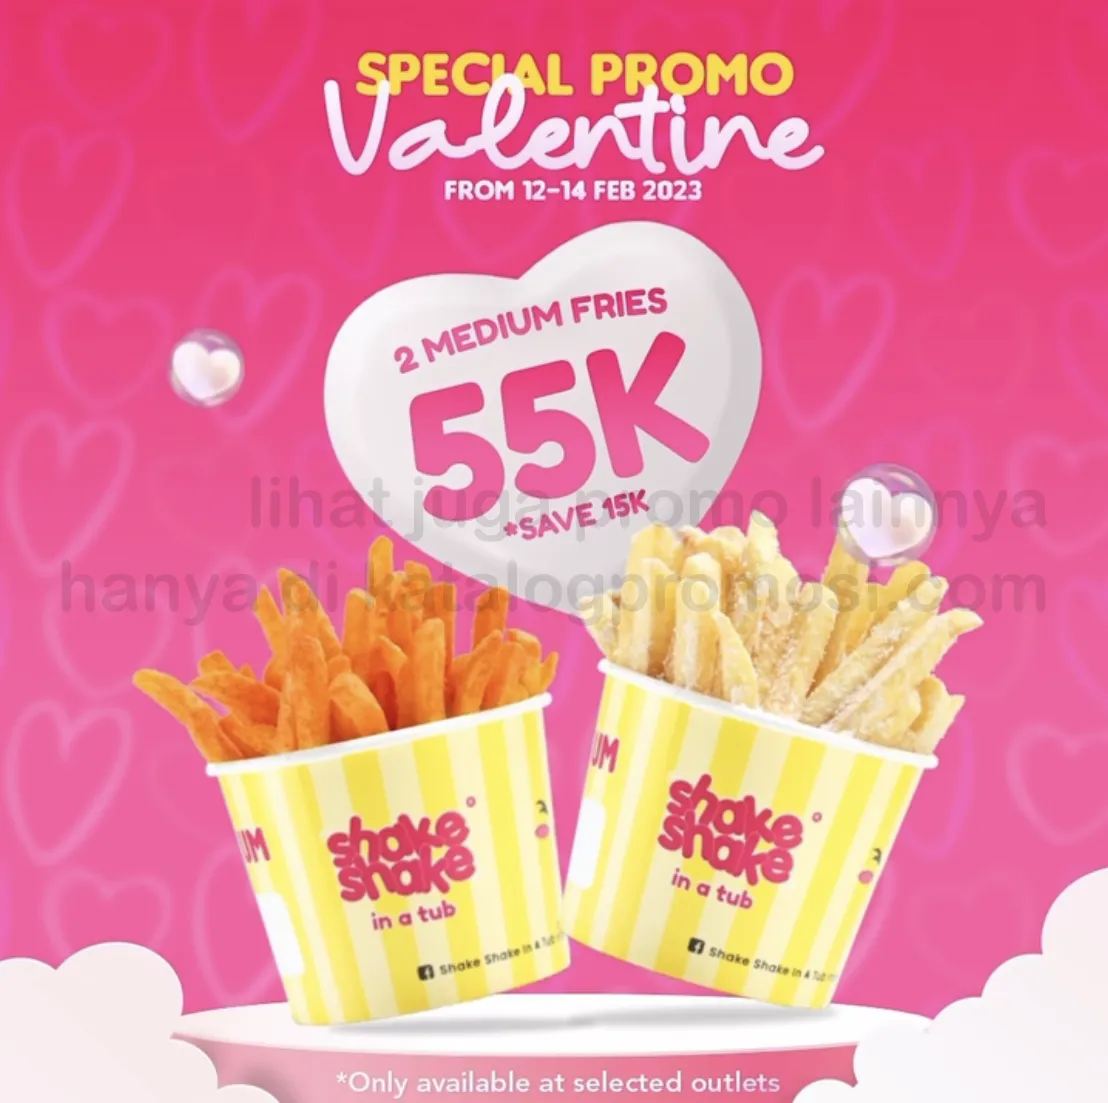 Promo Shake Shake in A Tub Valentine's Day Special - 2 Medium Fries only Rp. 55RIBU